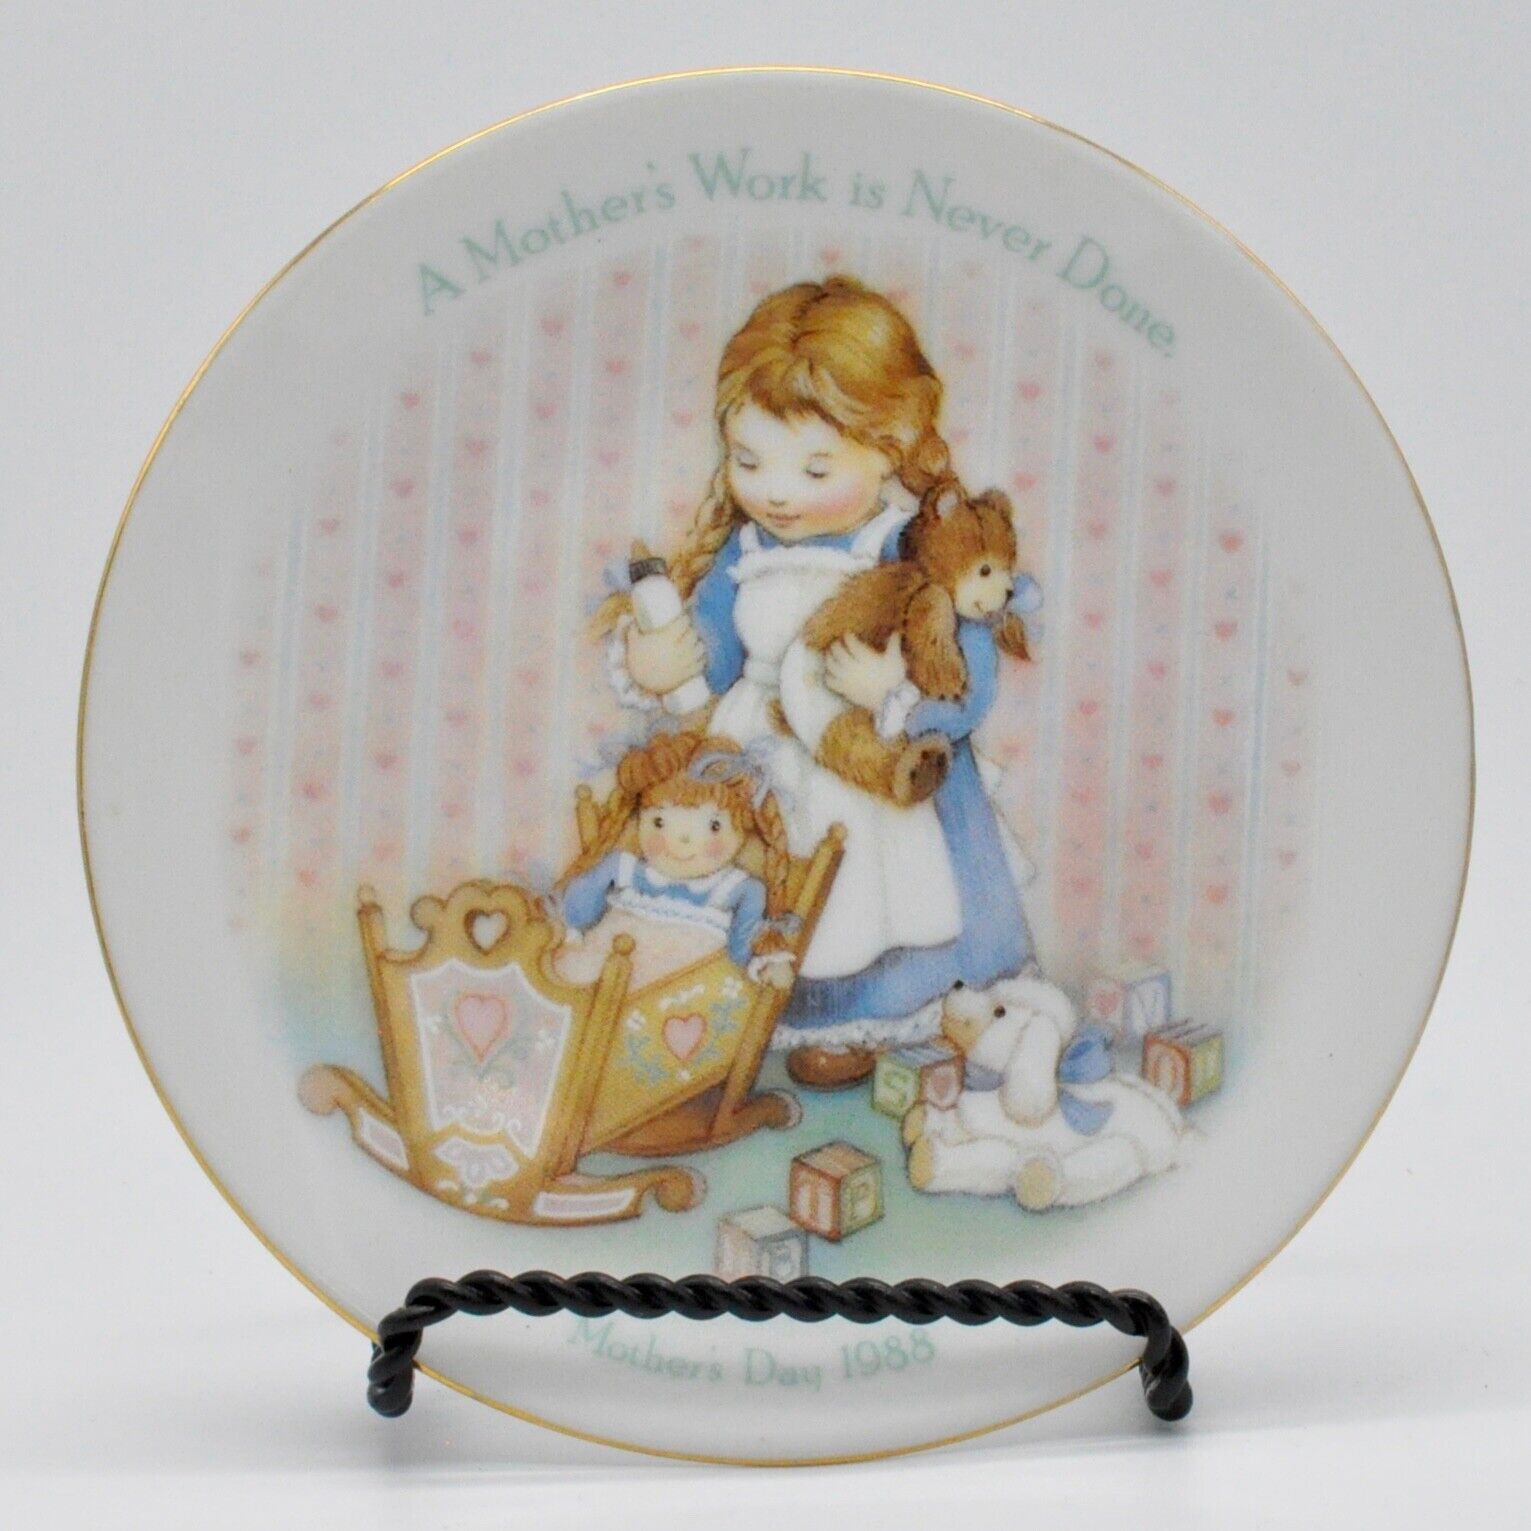 Vintage 1988 Mother’s Day Plate “A Mother’s Work is Never Done” by Avon